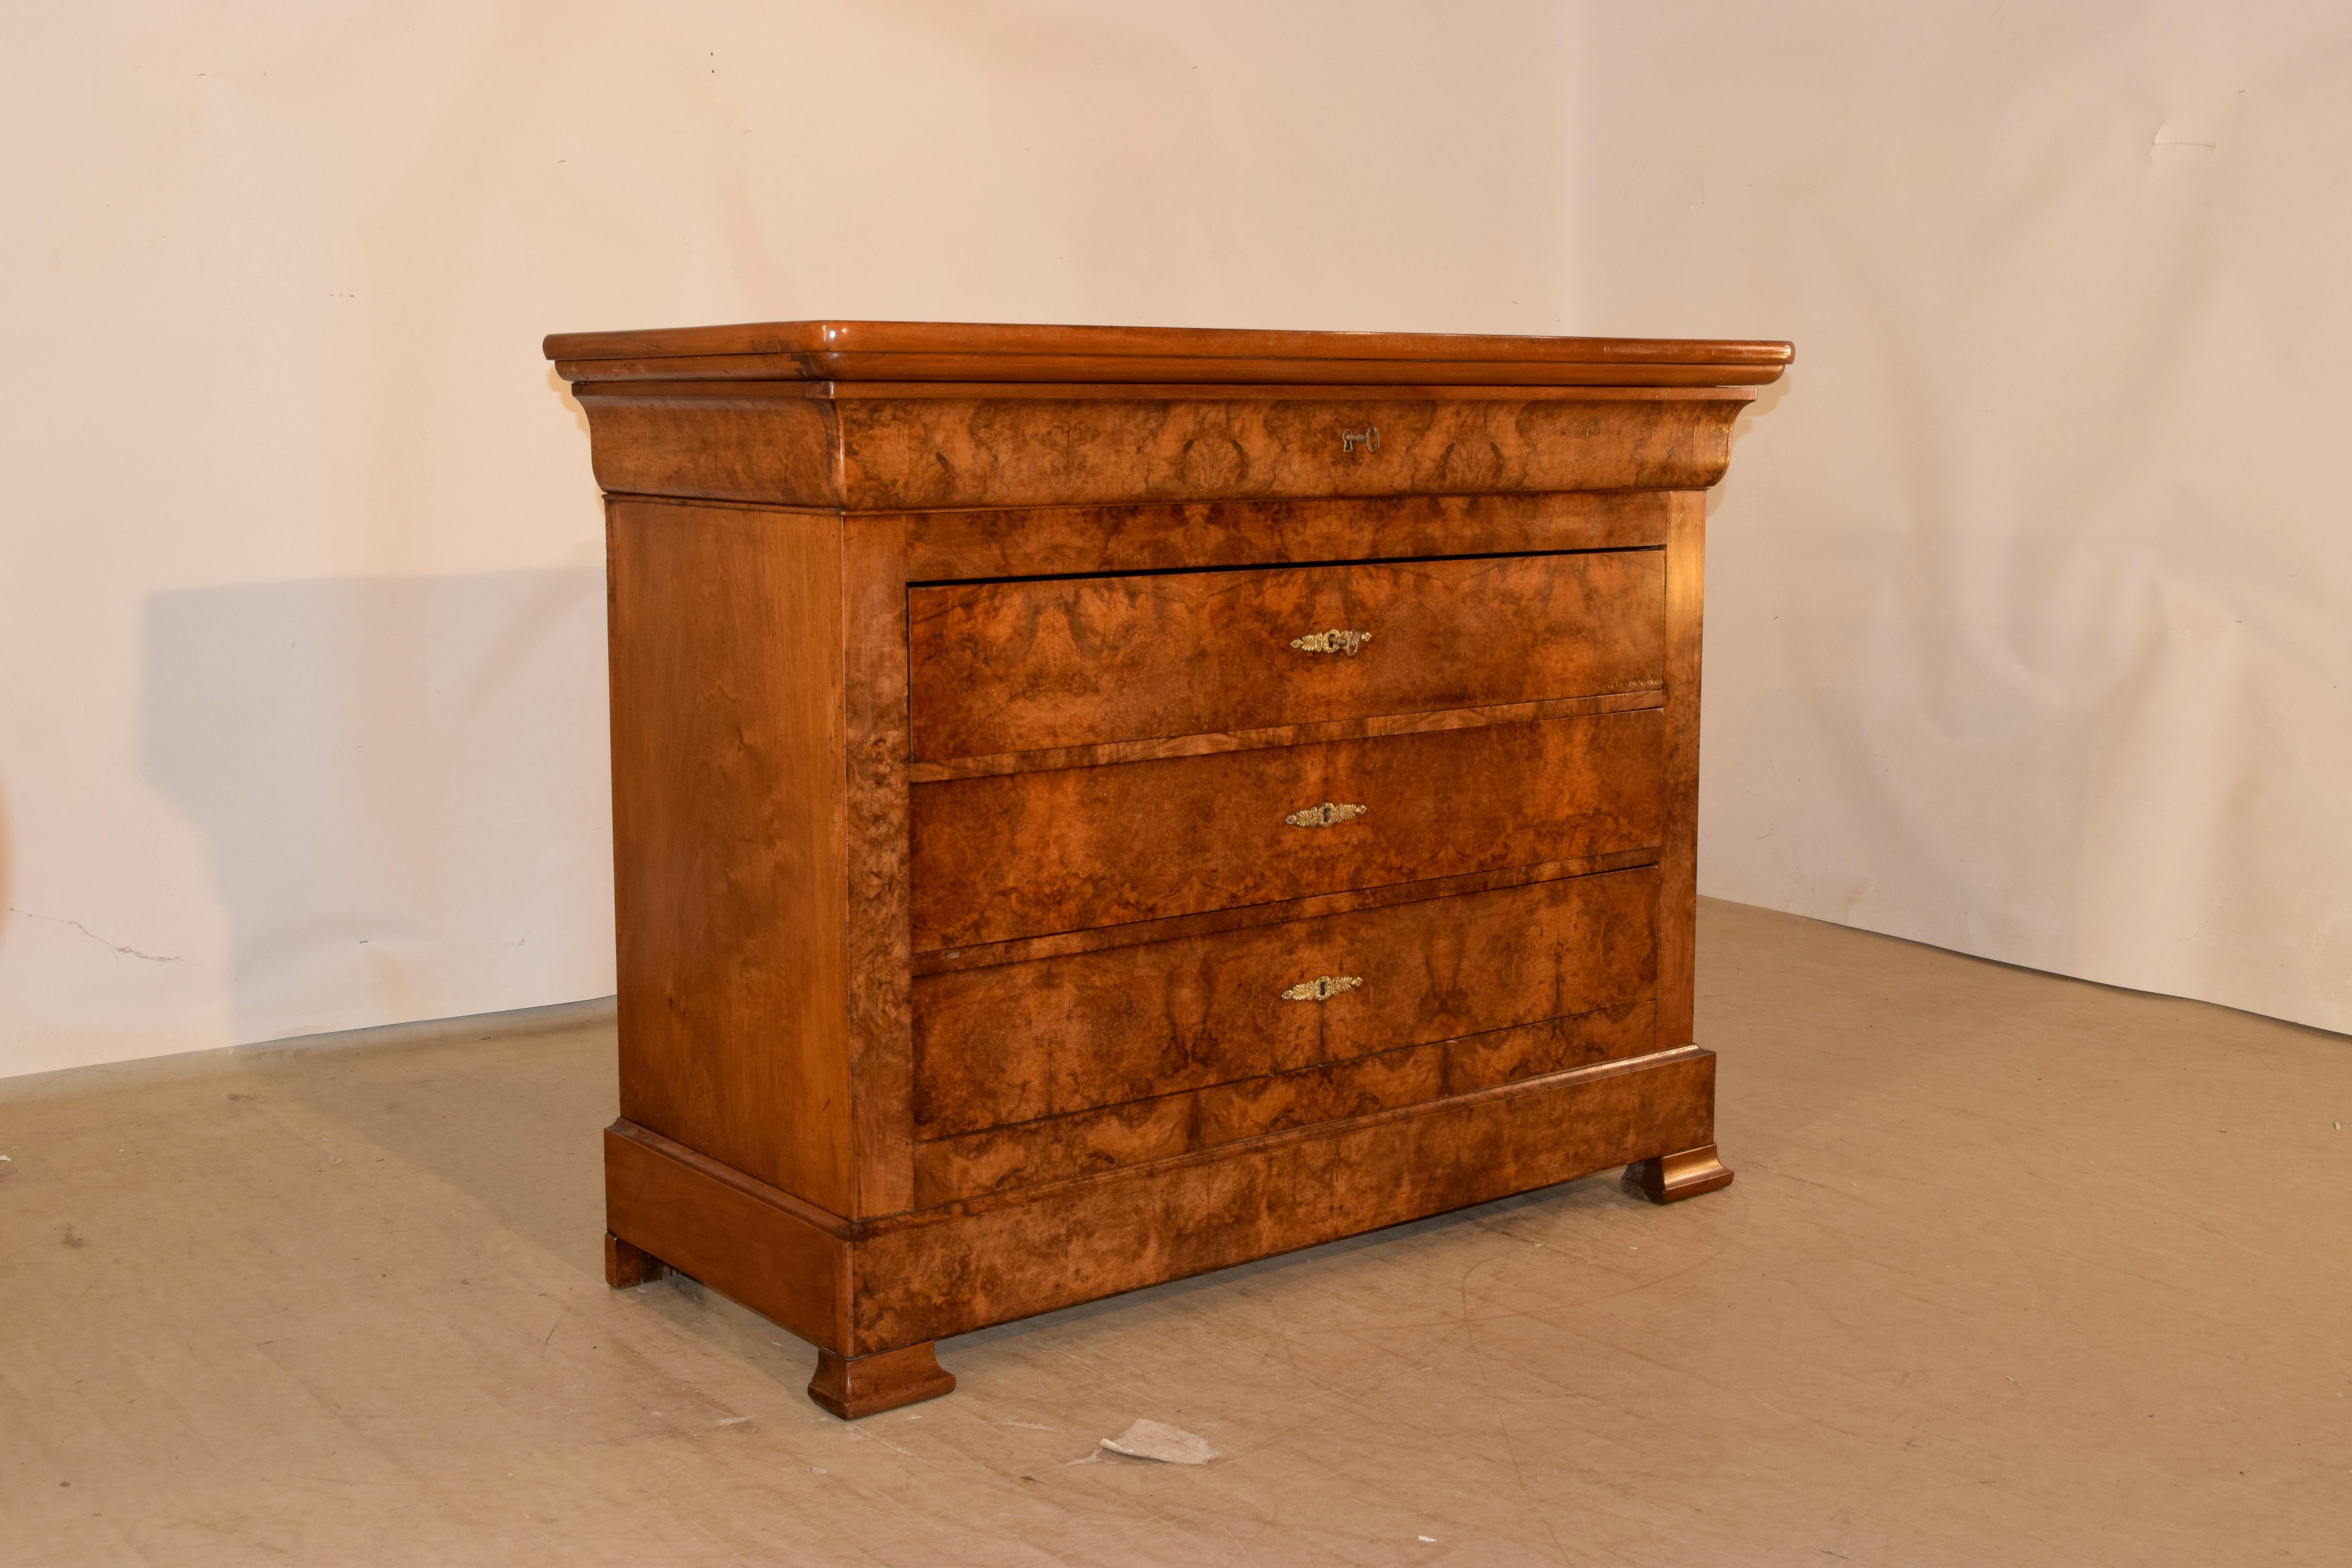 19th century Louis Philippe walnut commode from France with a beautifully grained and banded top, following down to simple sides and four drawers which are made from burl walnut for extraordinary design on the front. The top drawer is hidden in the